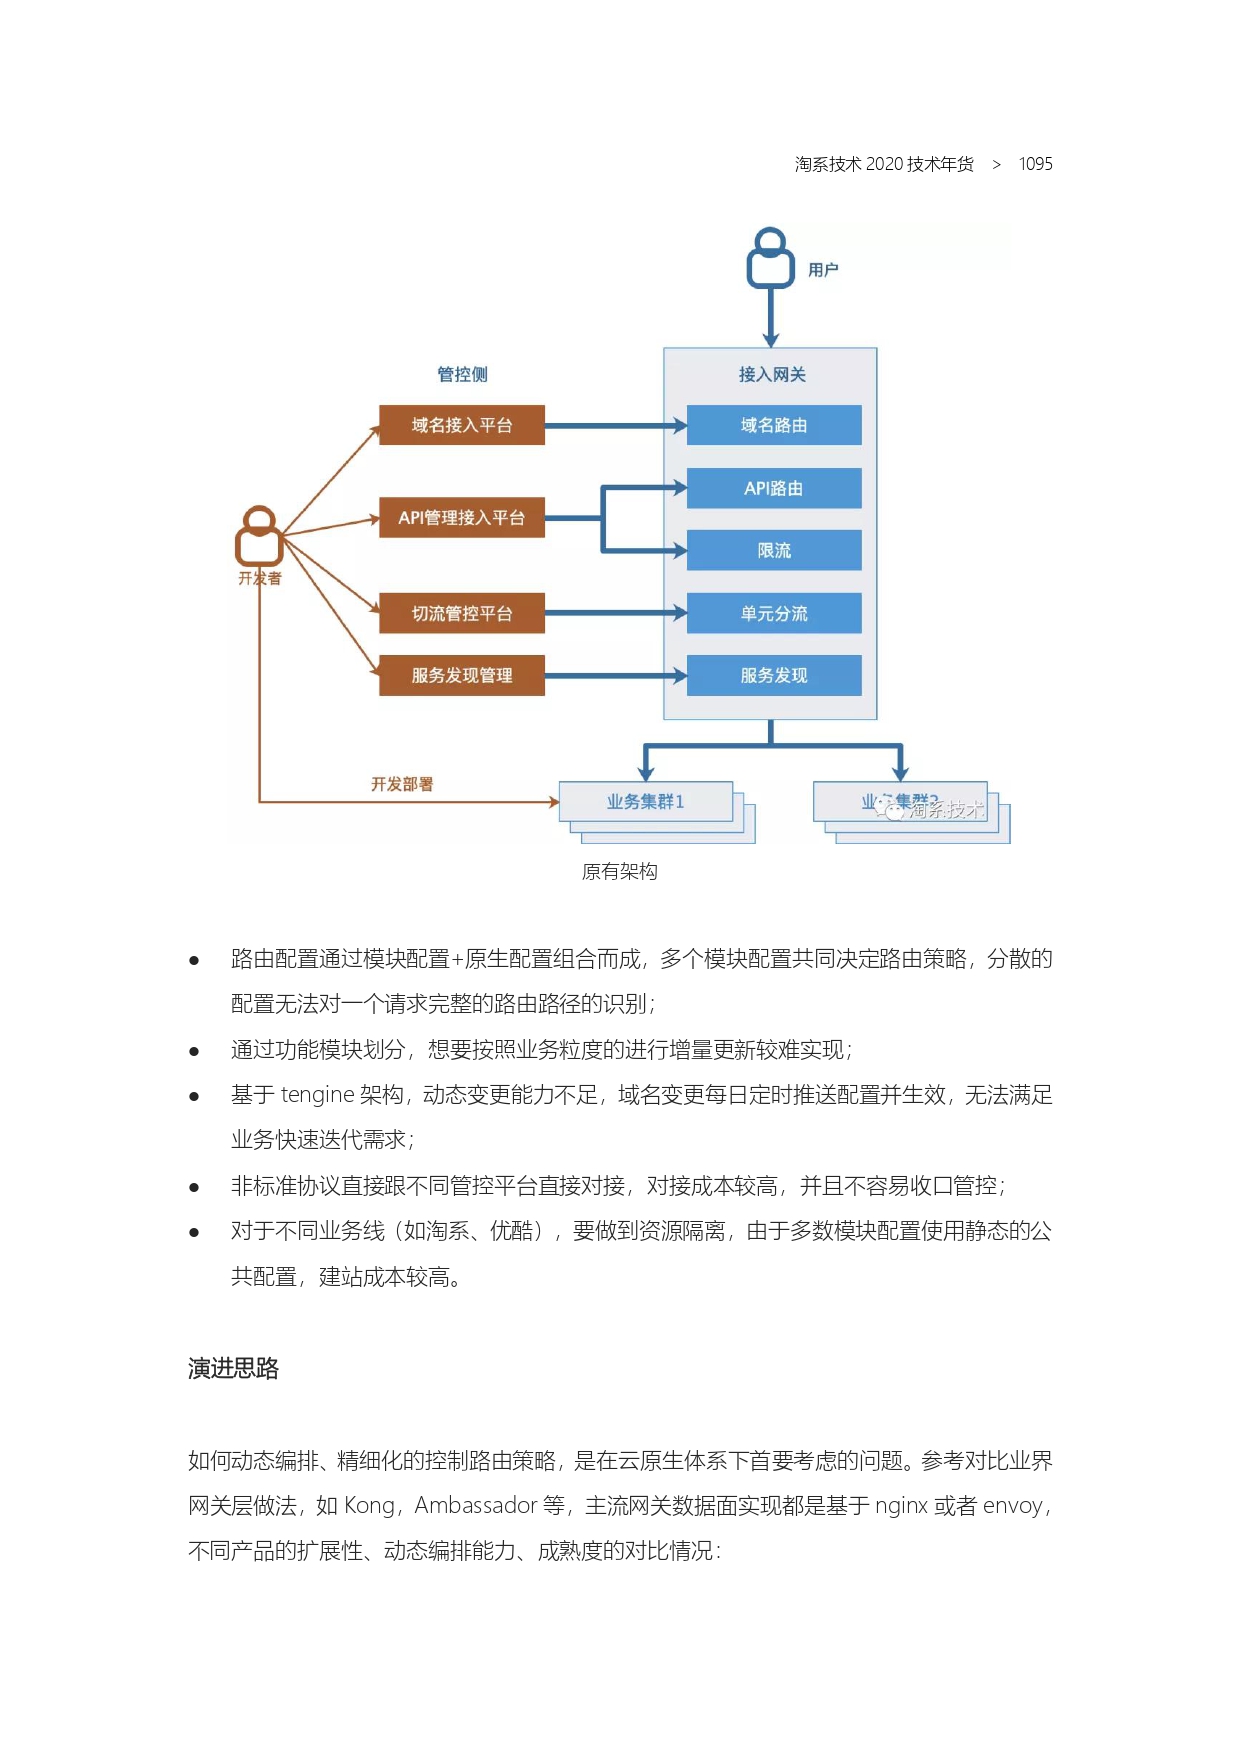 The Complete Works of Tao Technology 2020-571-1189-301-619_page-0225.jpg